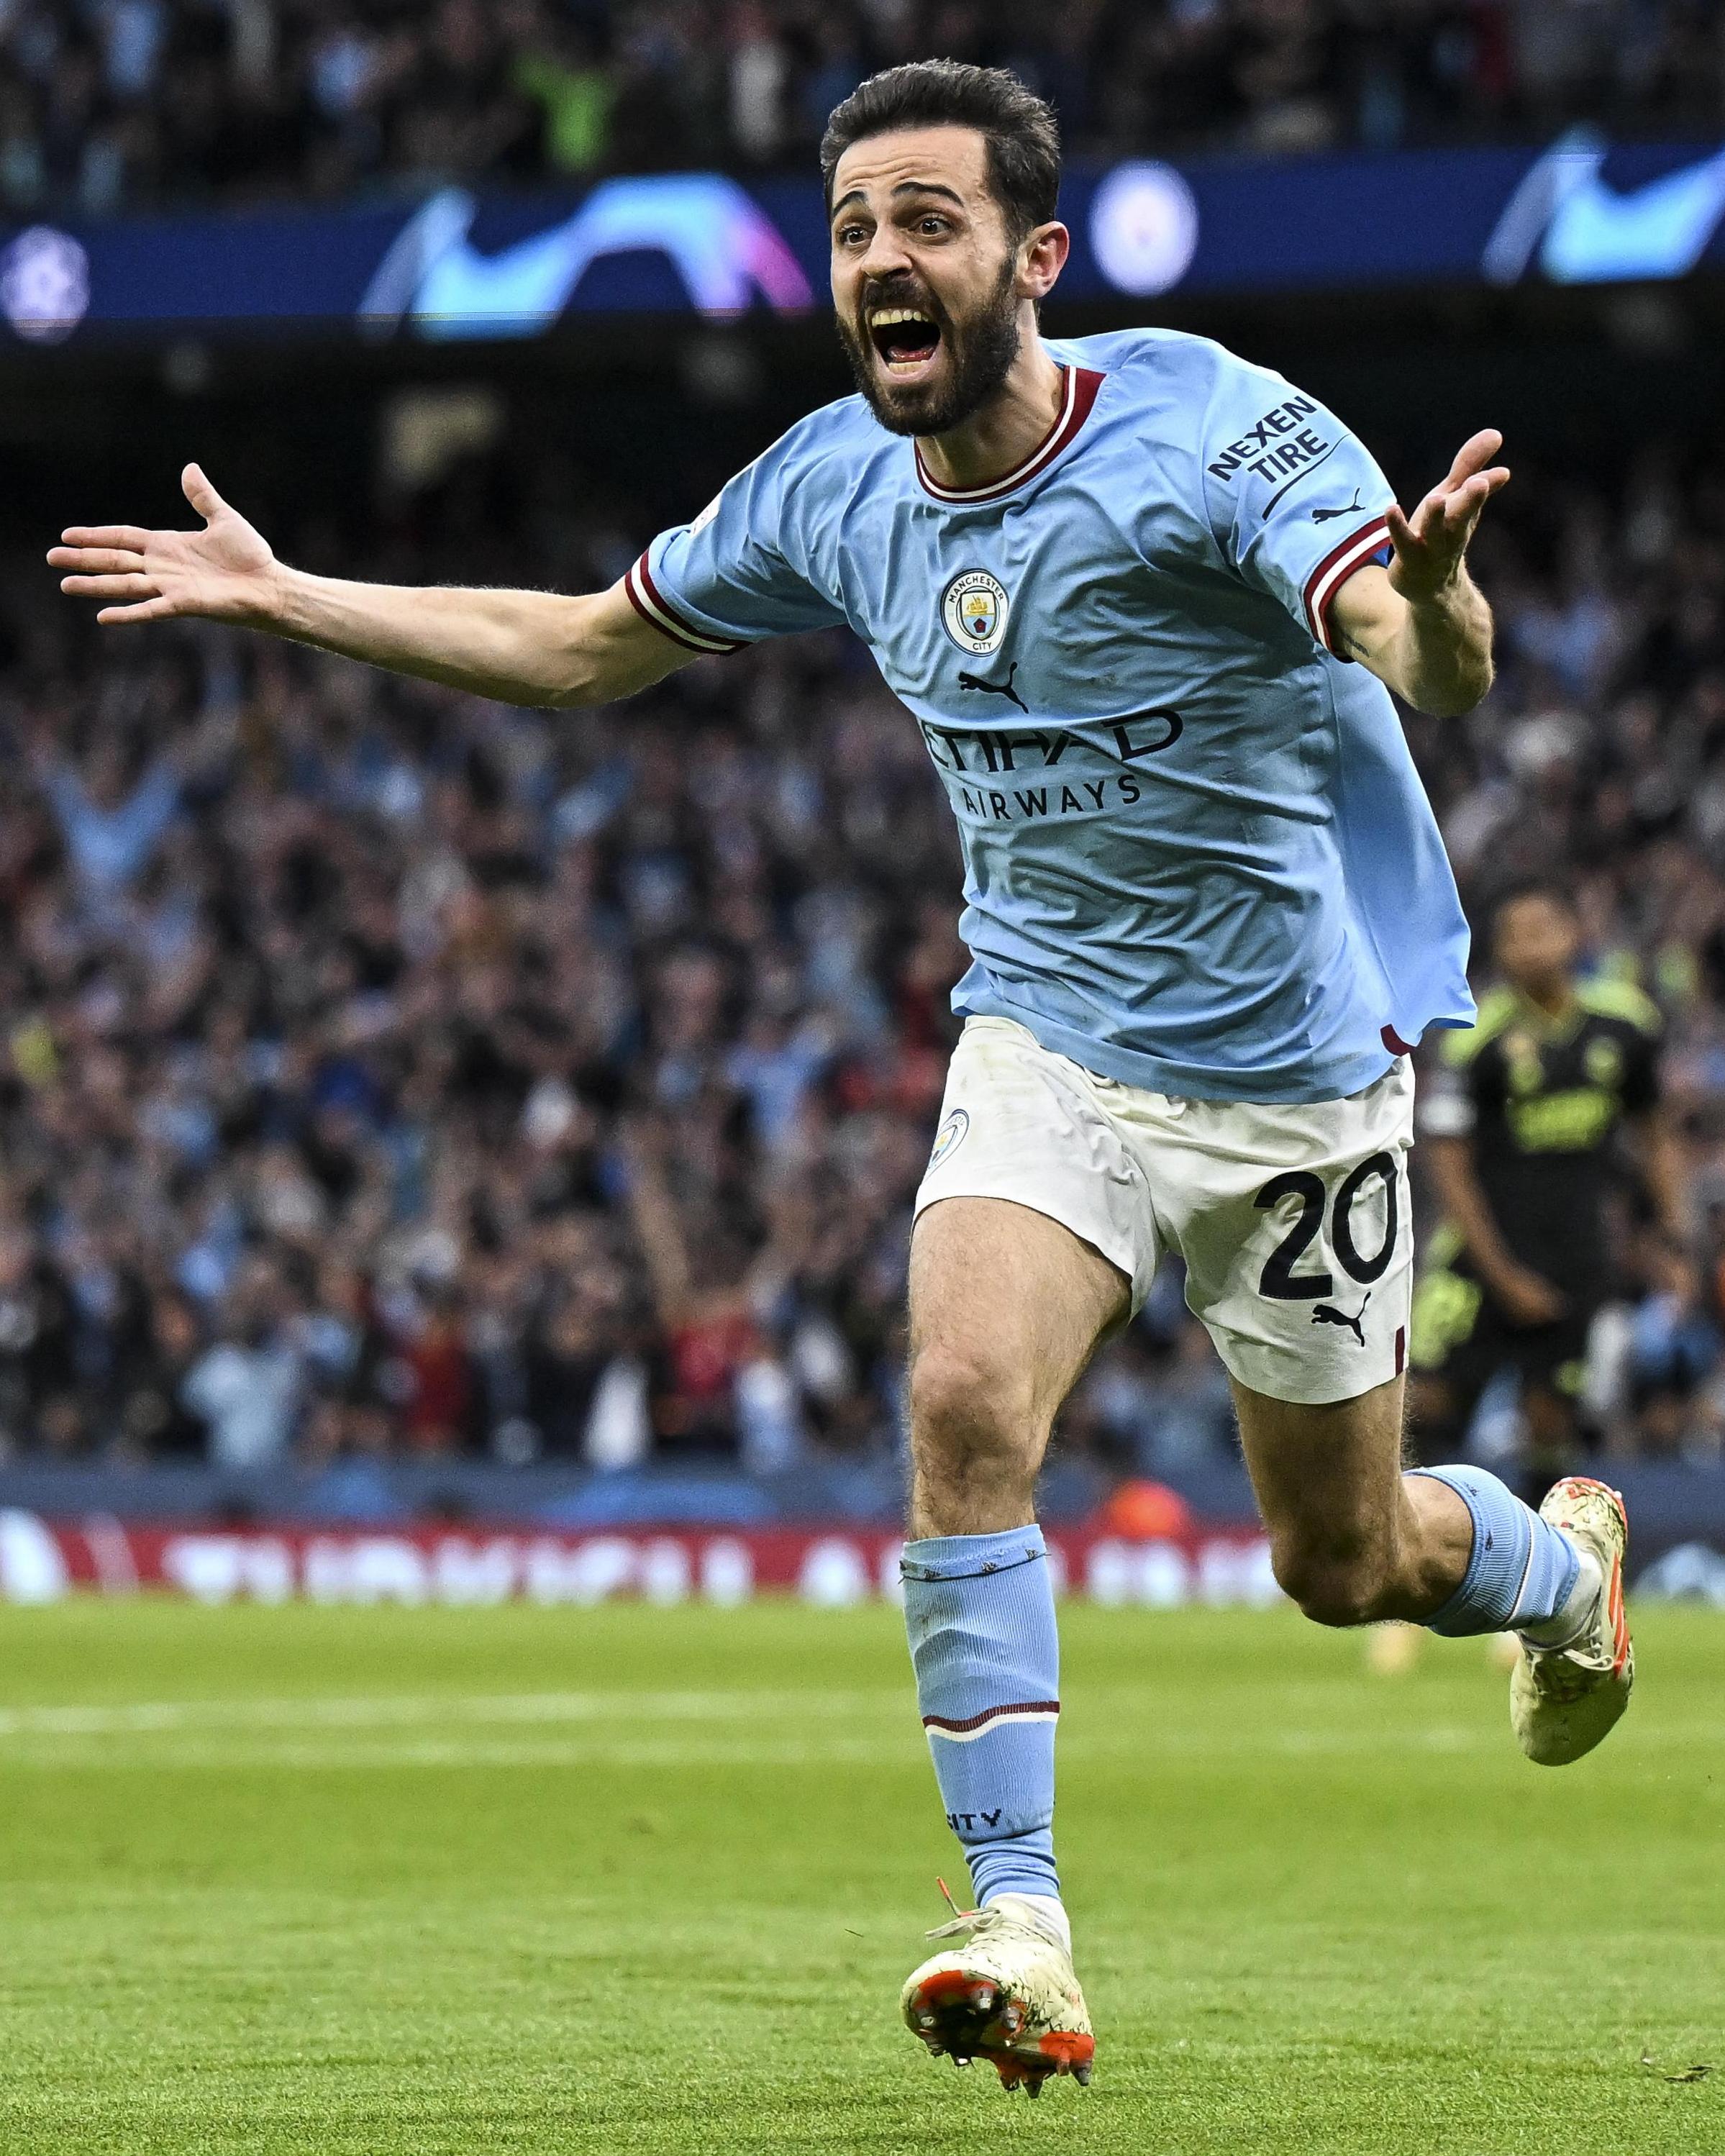 Silva scored a brace as City progressed to their second Champions League final